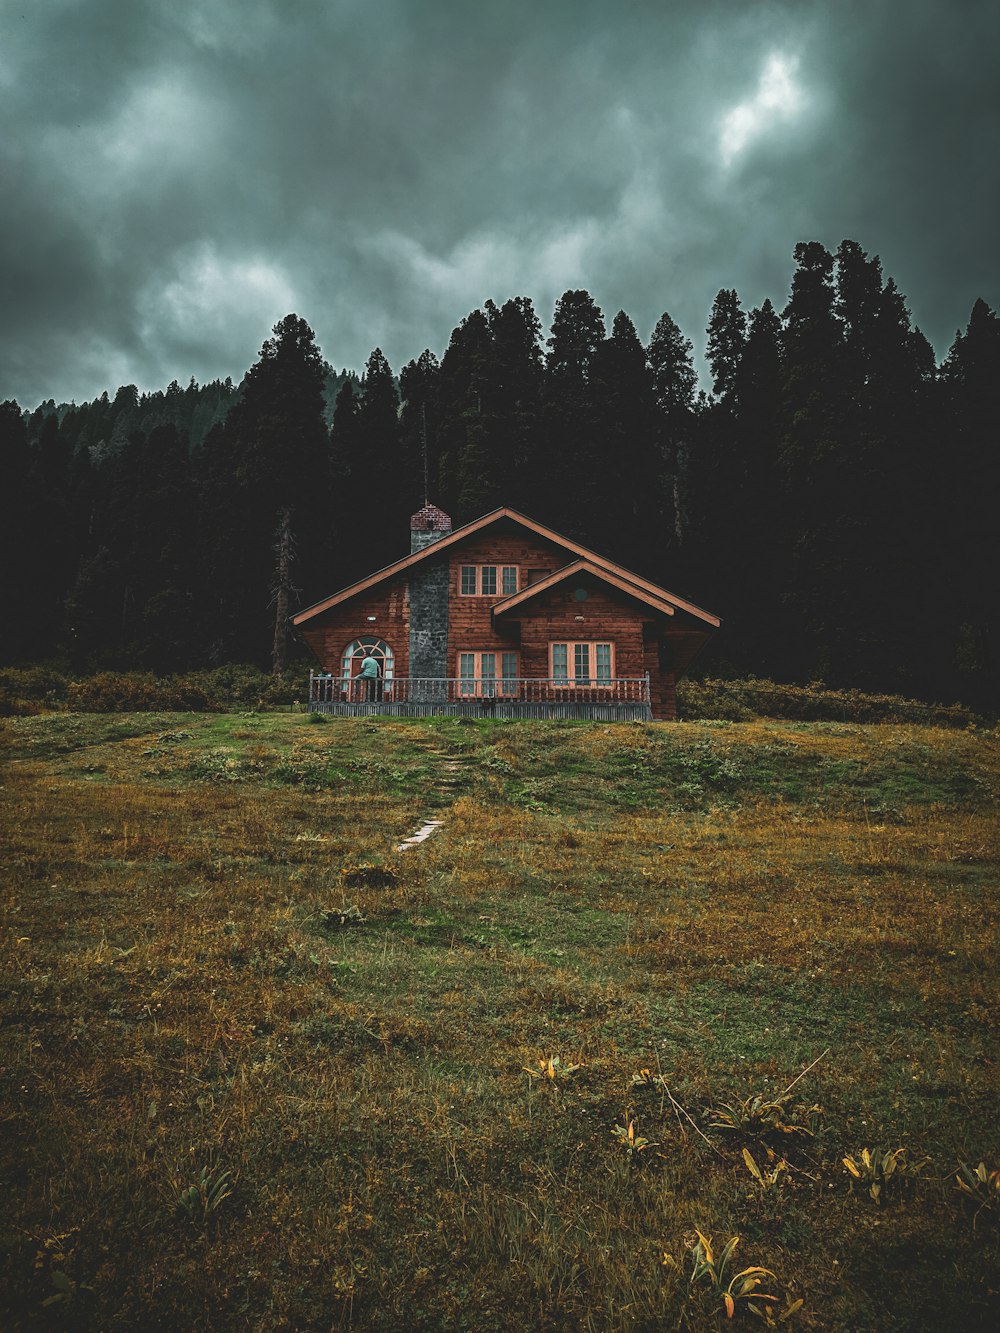 brown wooden house on green grass field near green trees under gray clouds